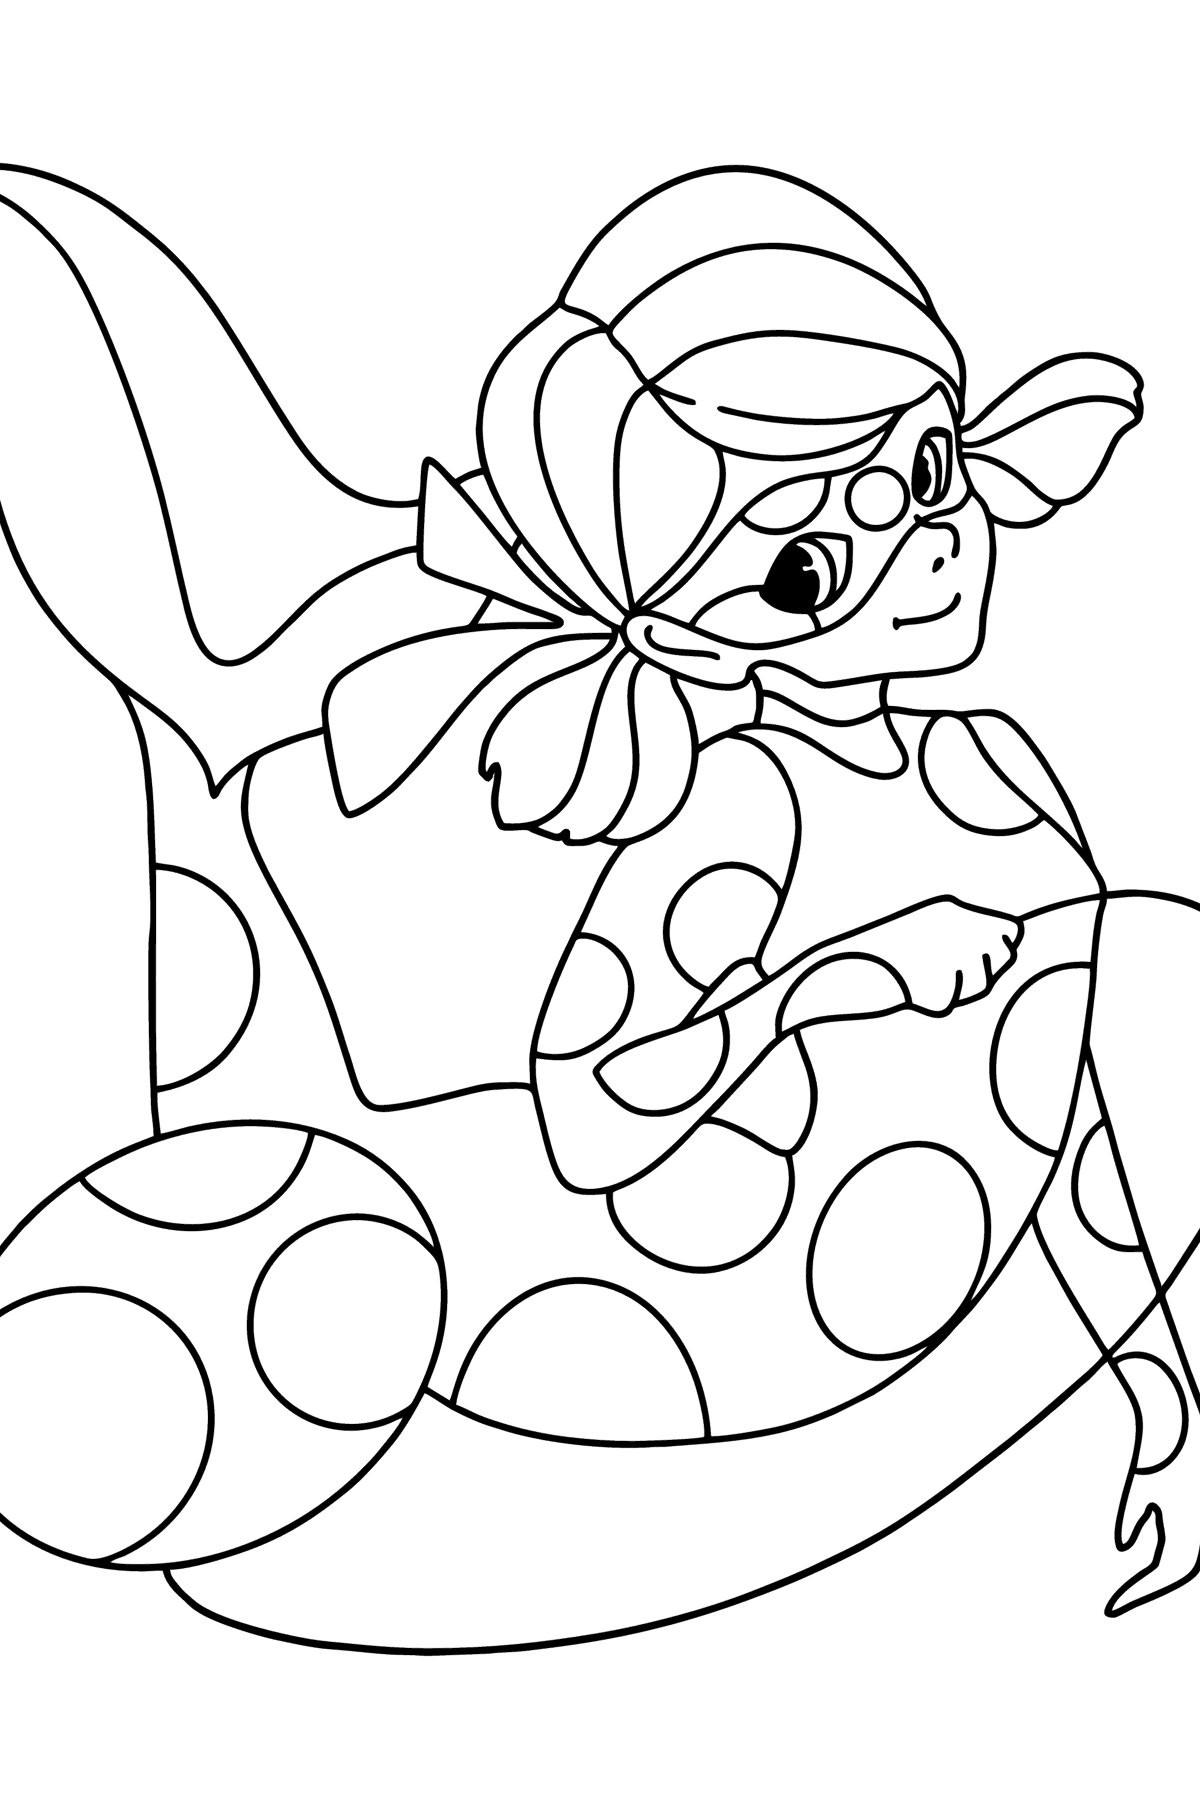 Aqua Ladybug coloring page - Coloring Pages for Kids